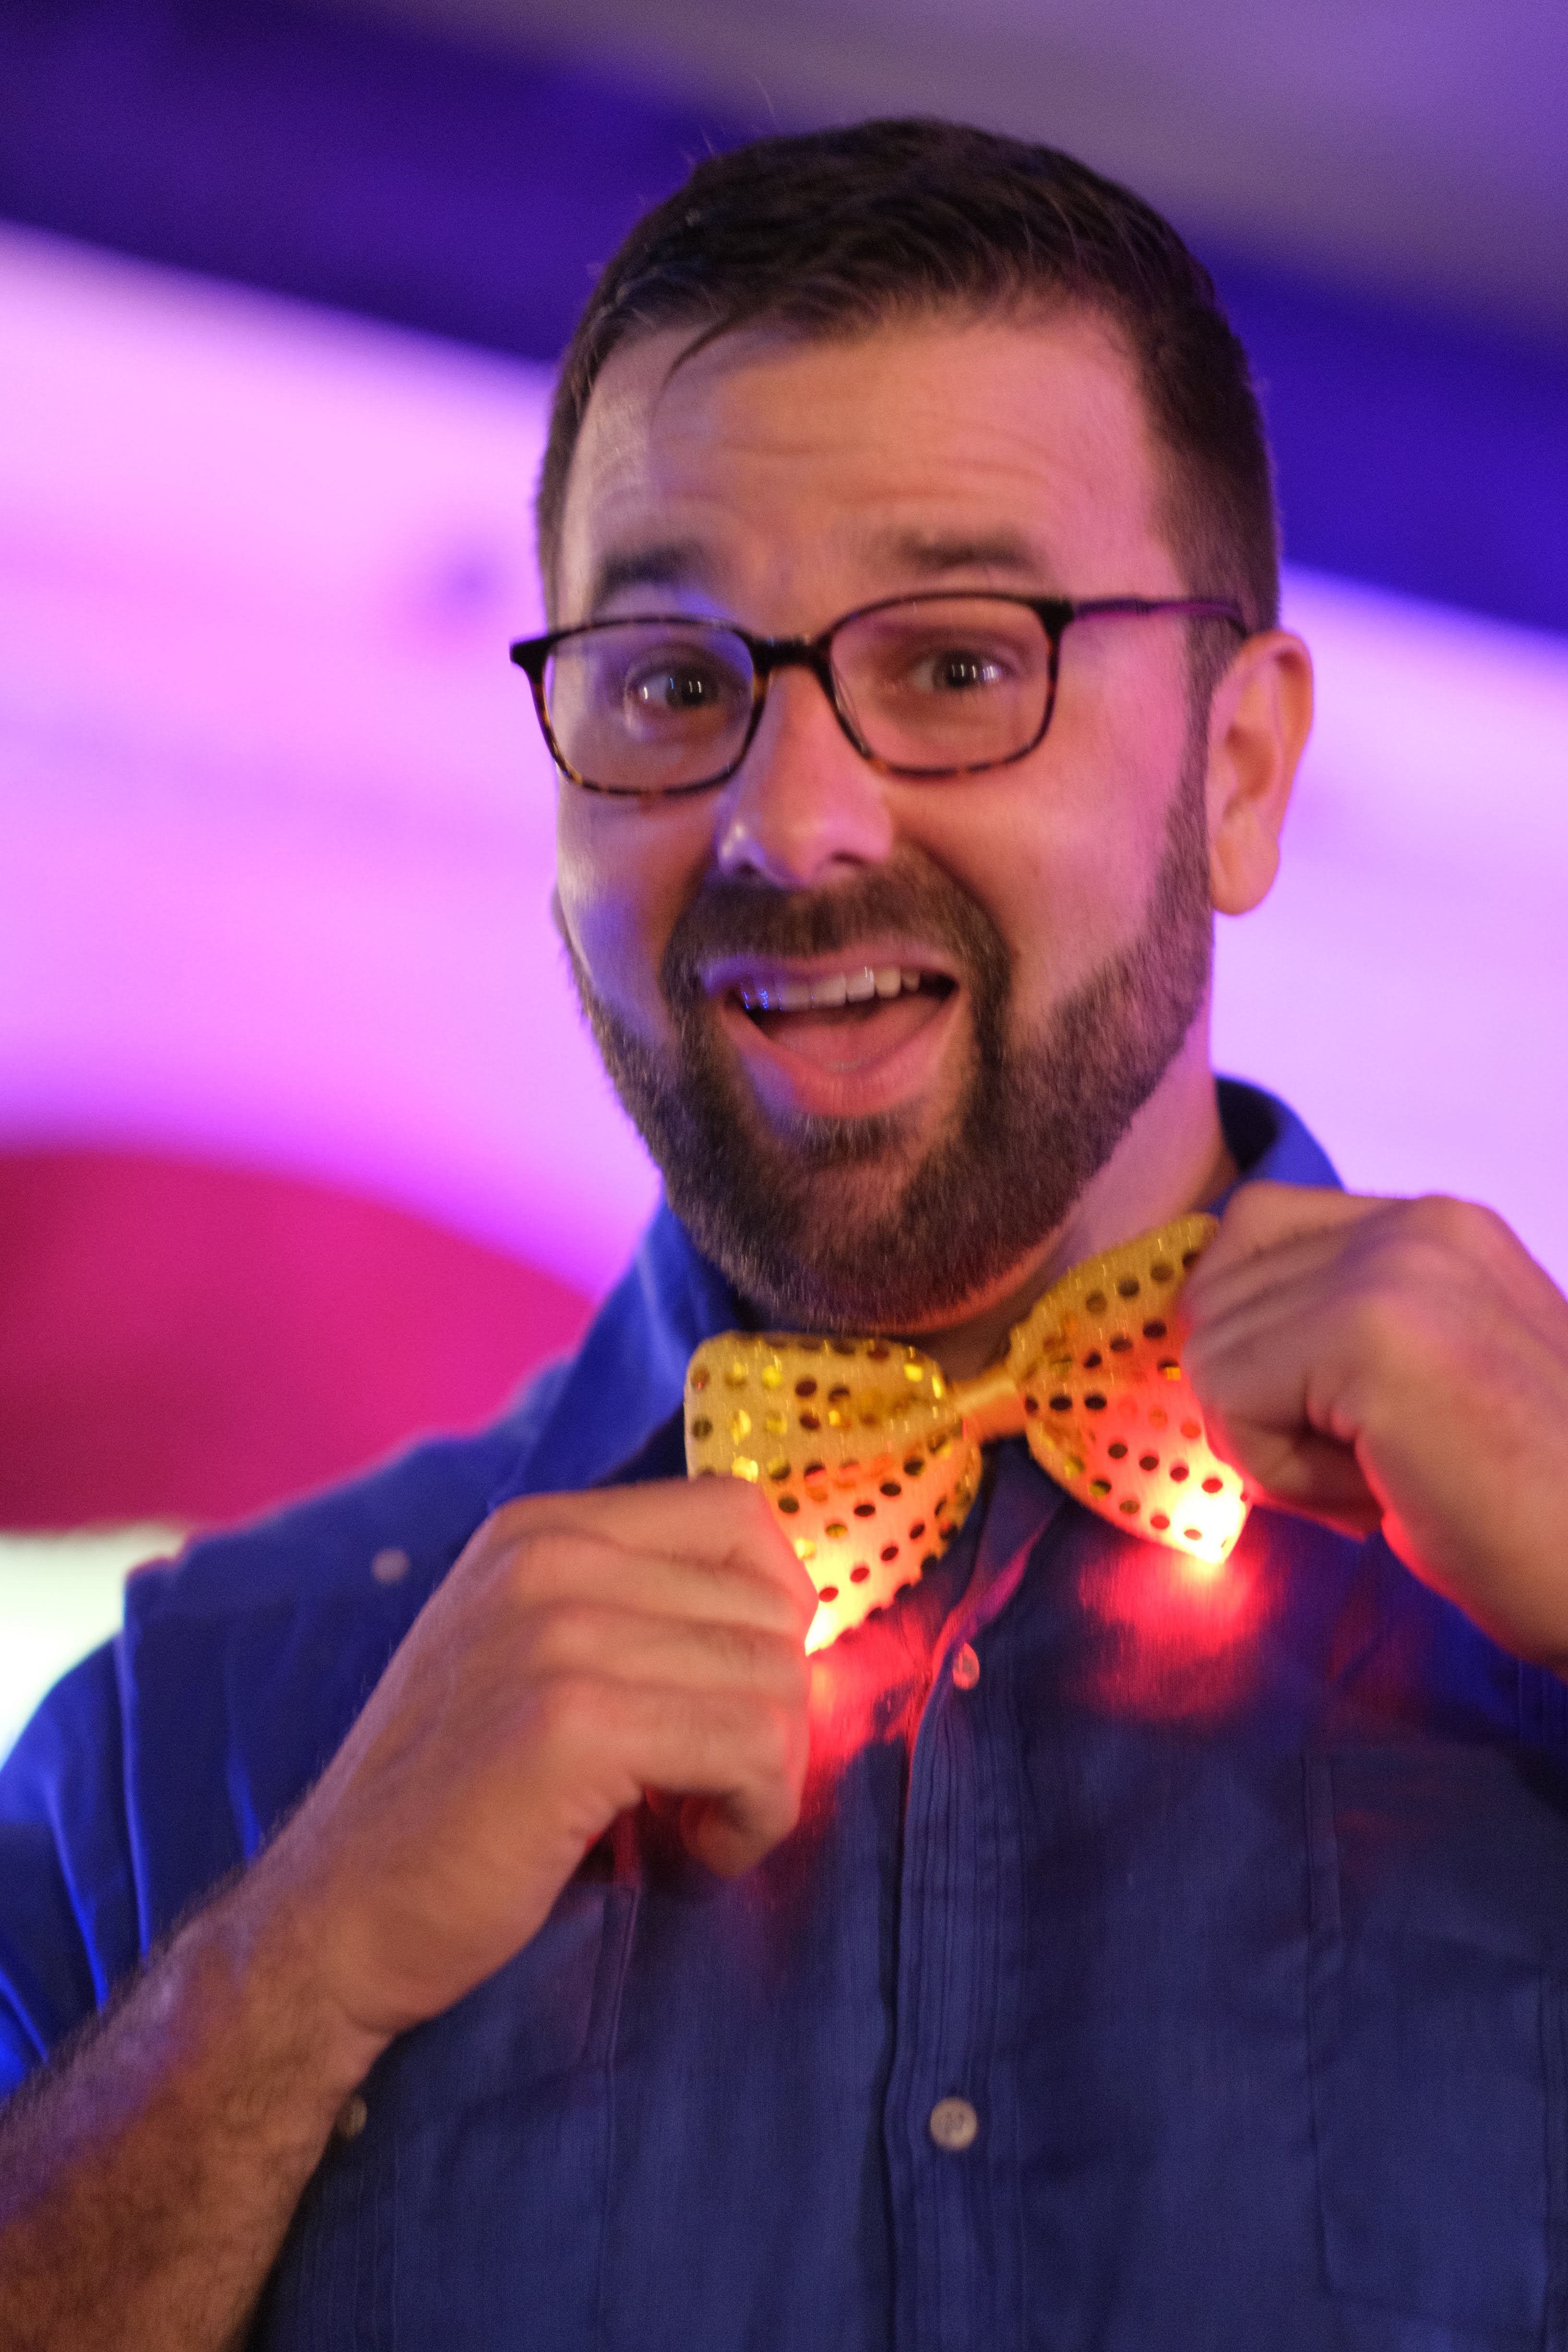 Gardner Tours Owner and Tour Guide Colby Gardner smiling big and twisting his bowtie at the big show in the Cabaret Parisien on New Years 2020 in Havana, Cuba